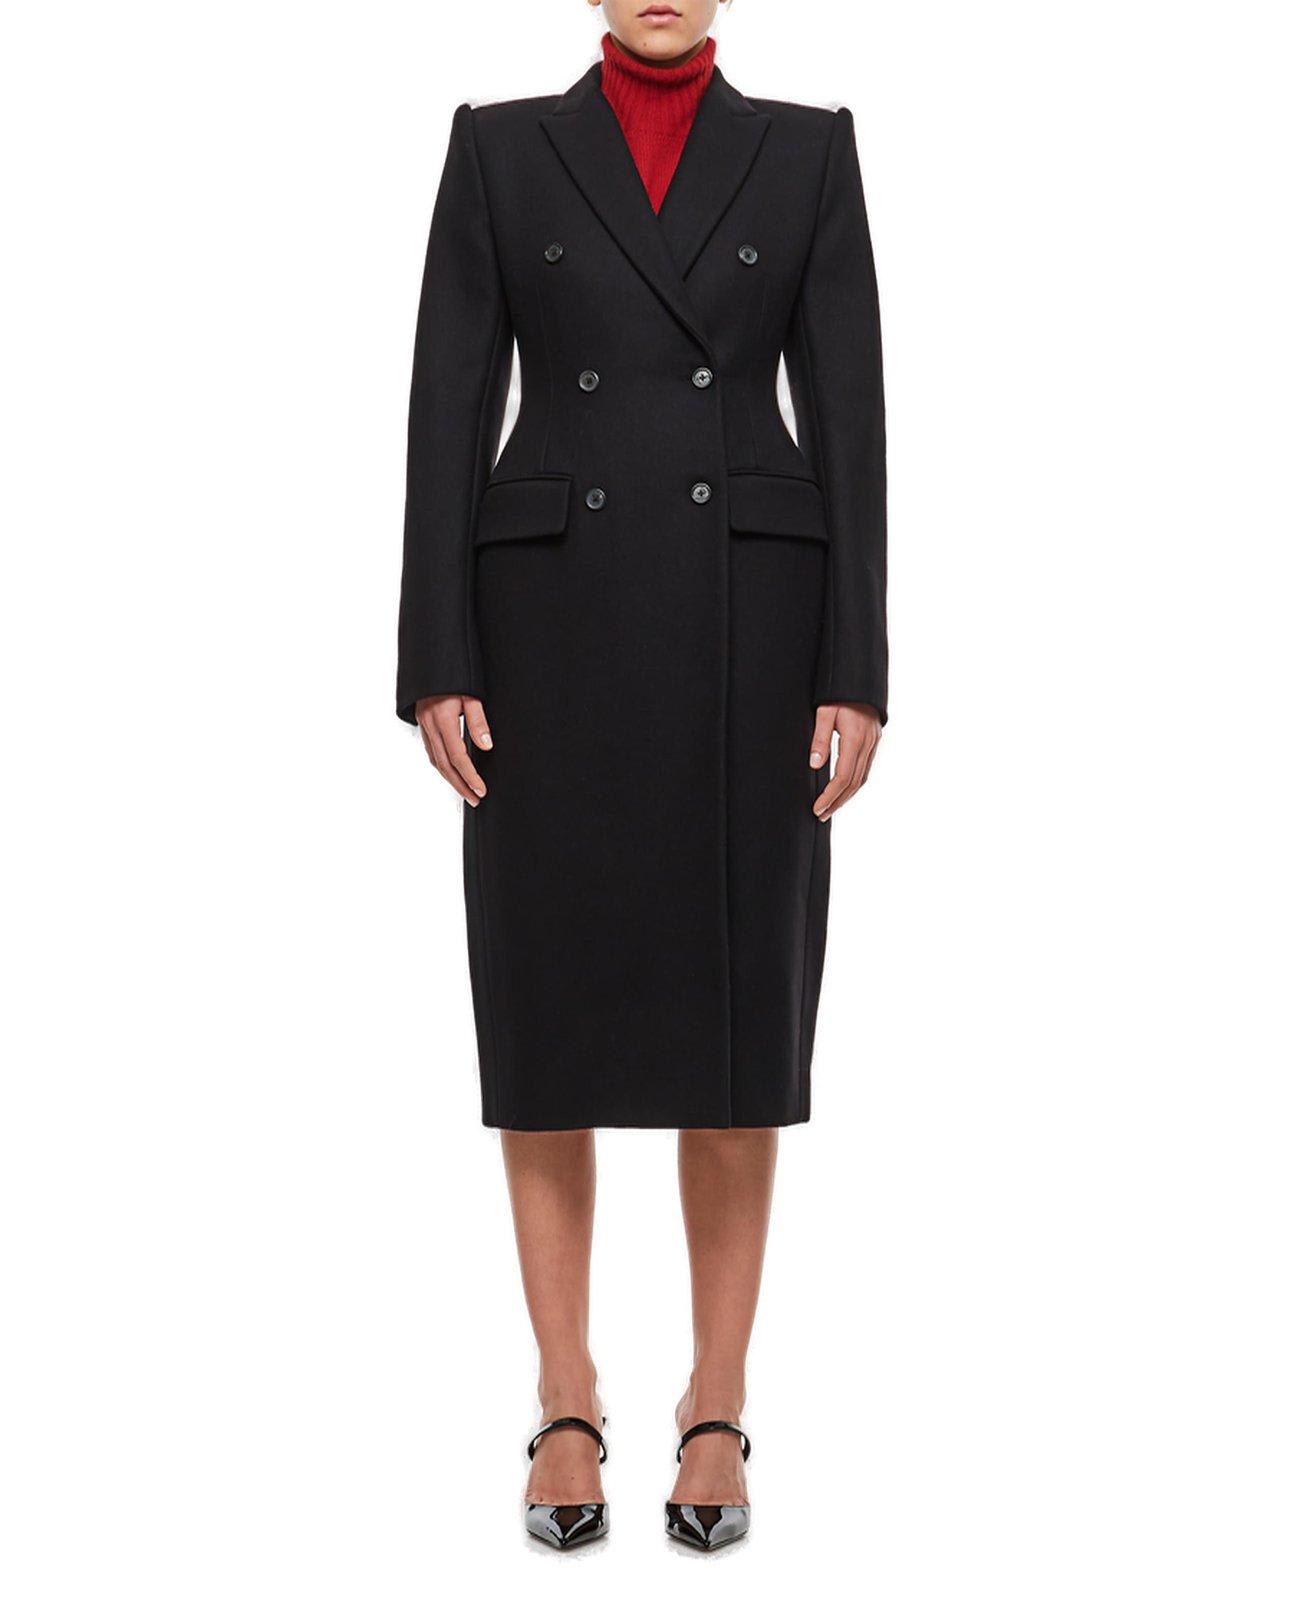 The Carmona Double-breasted Trench Coat